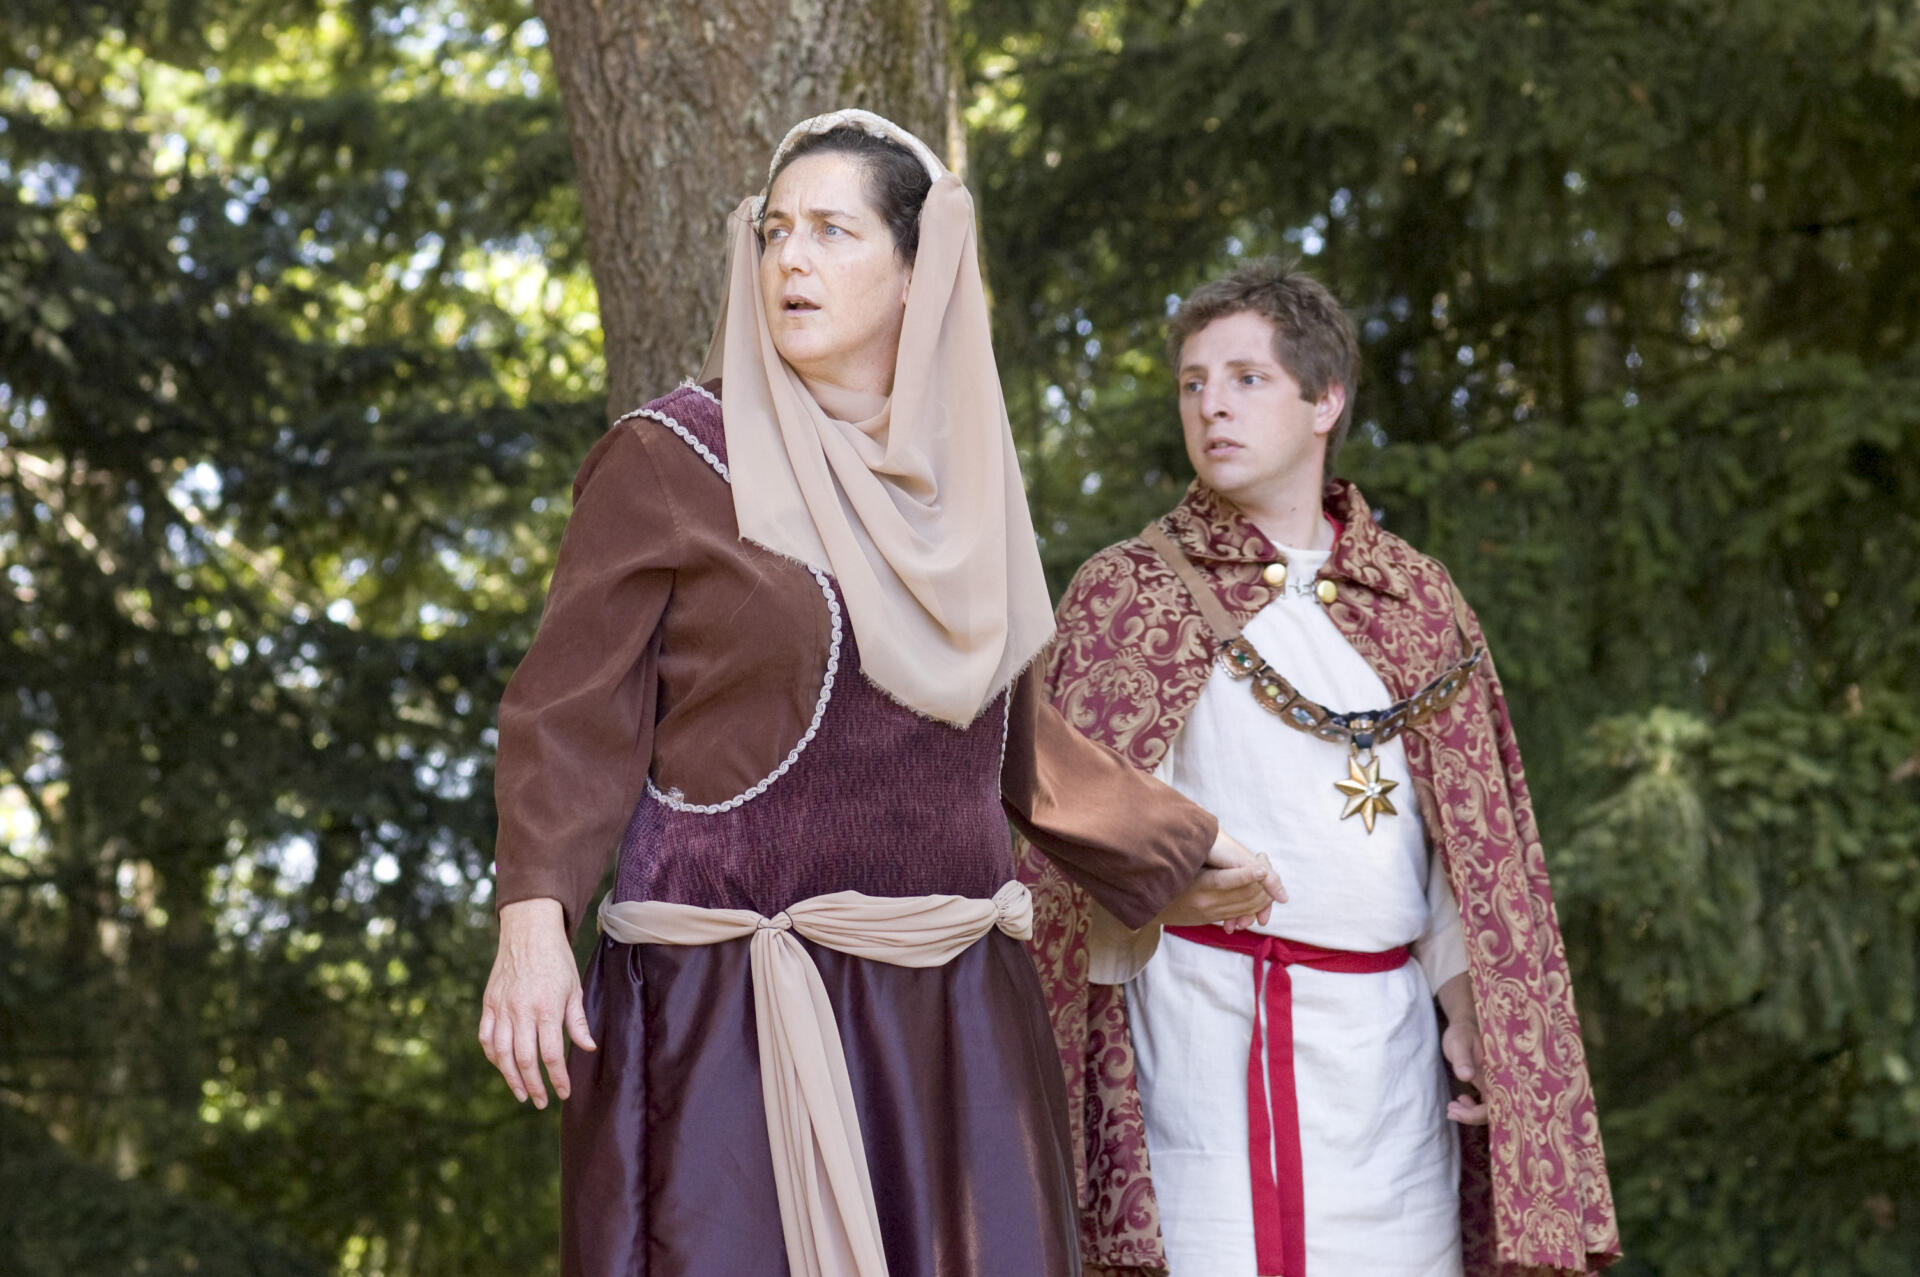 Erin Day and Anthony Duckett in King John - 2009